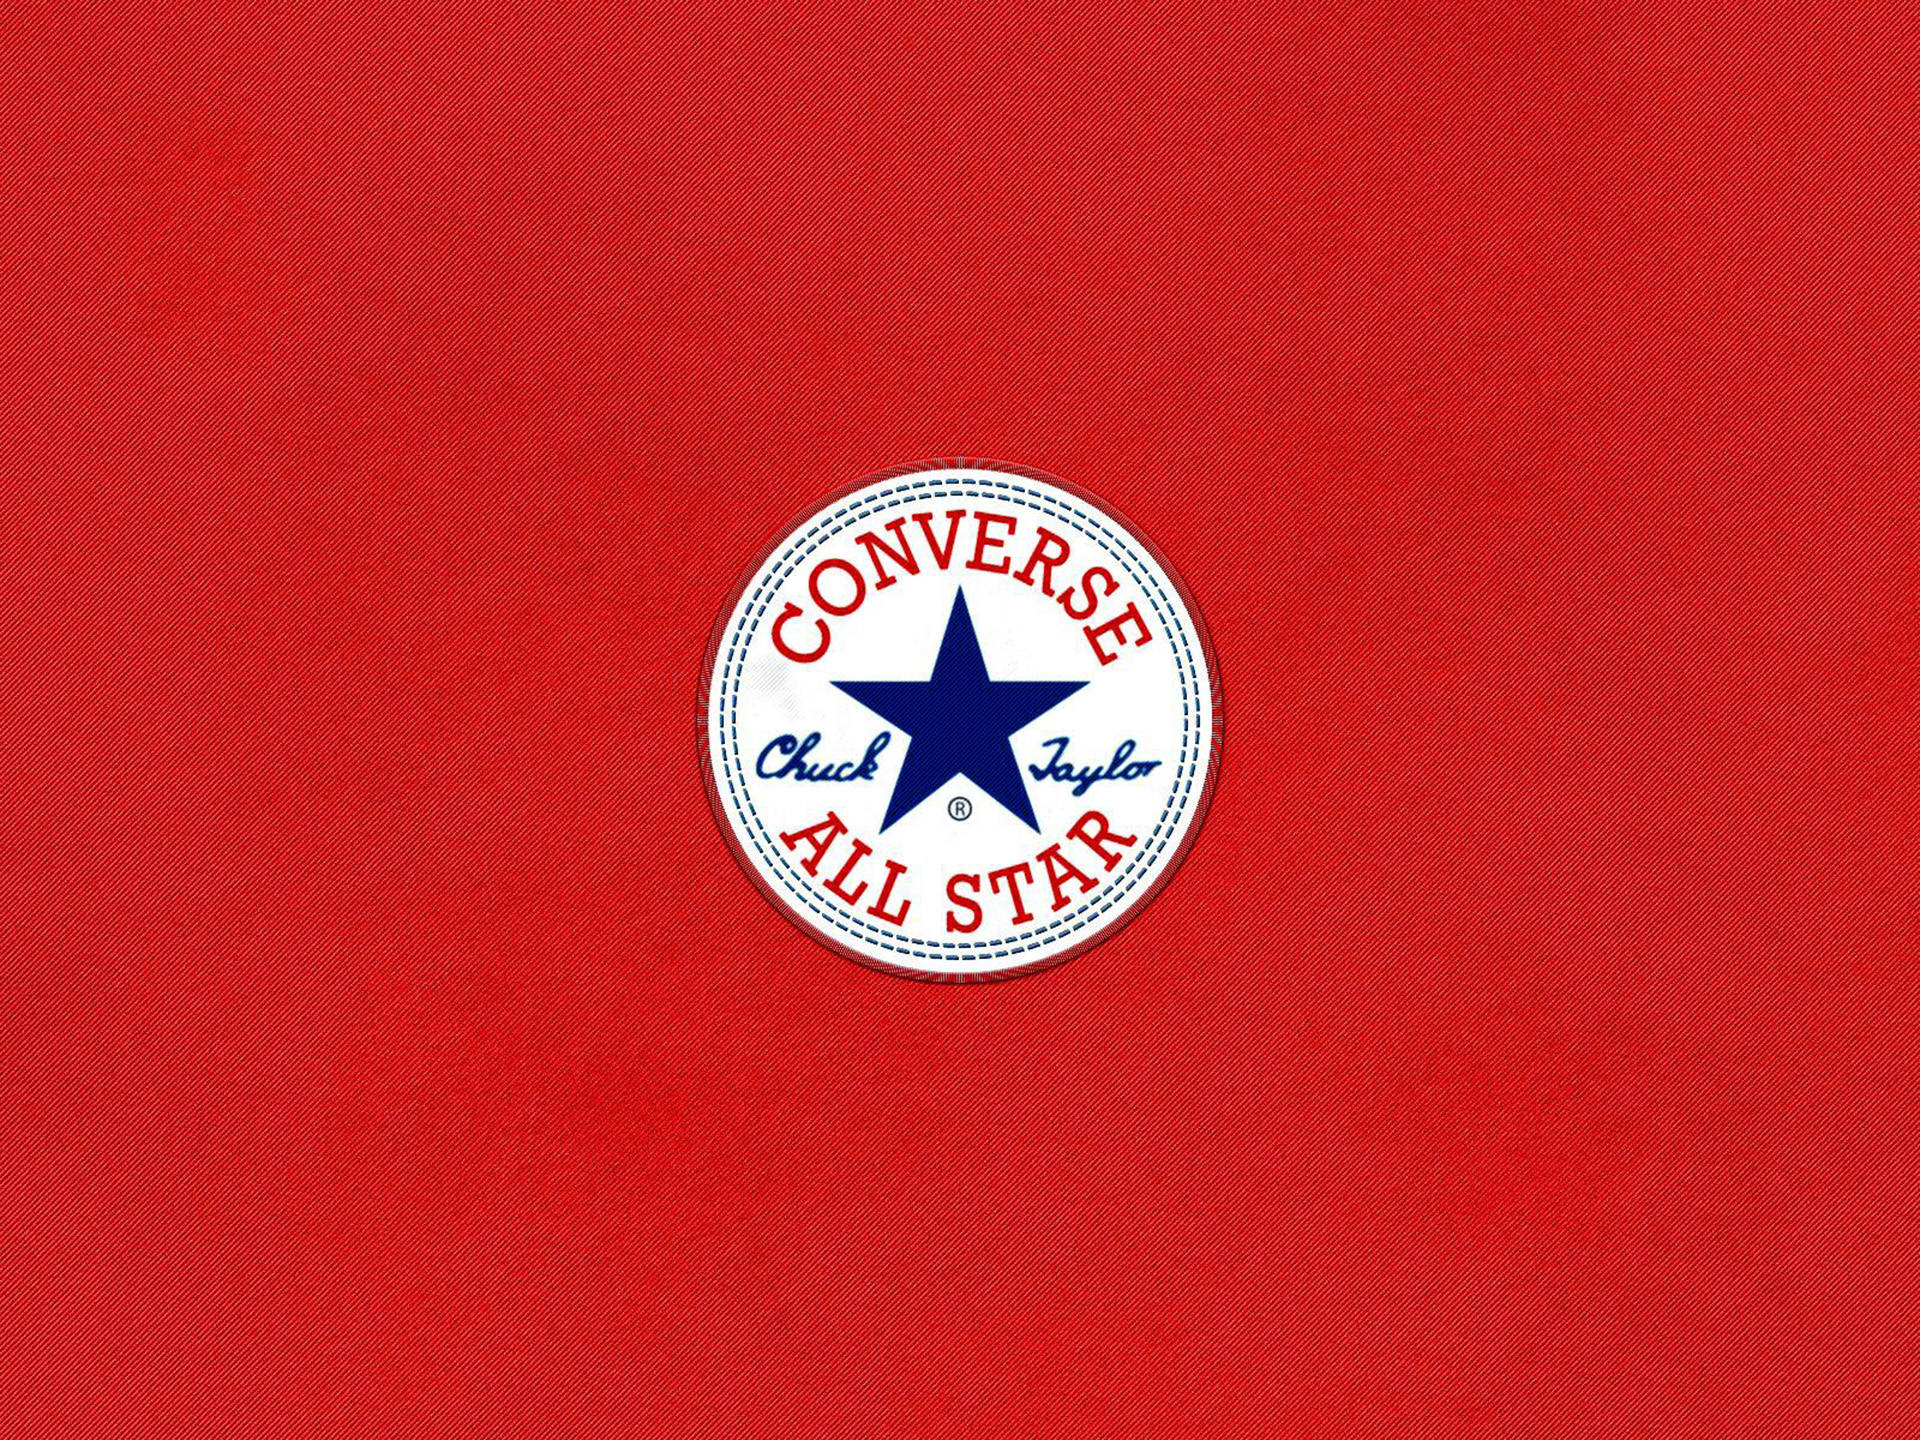 Converse Logo On Red